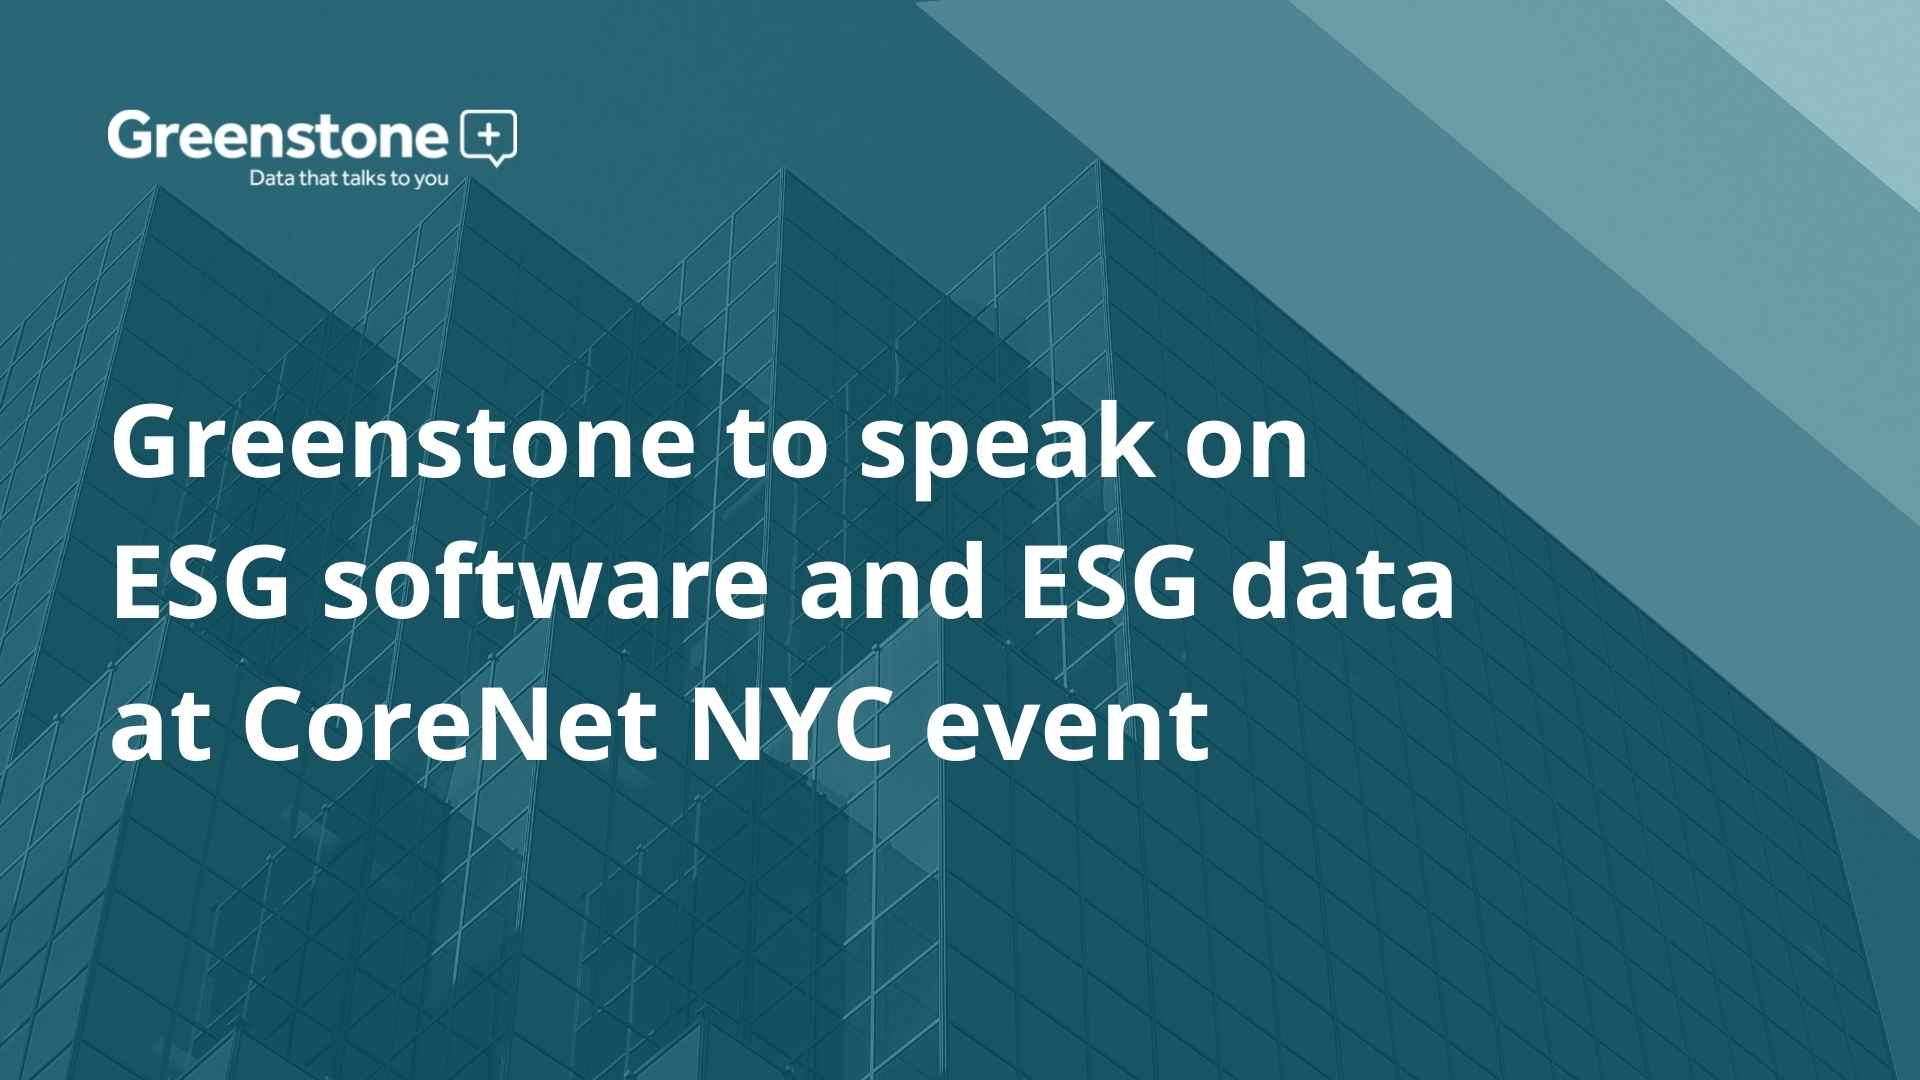 Greenstone to speak on ESG software and ESG data at CoreNet NYC event